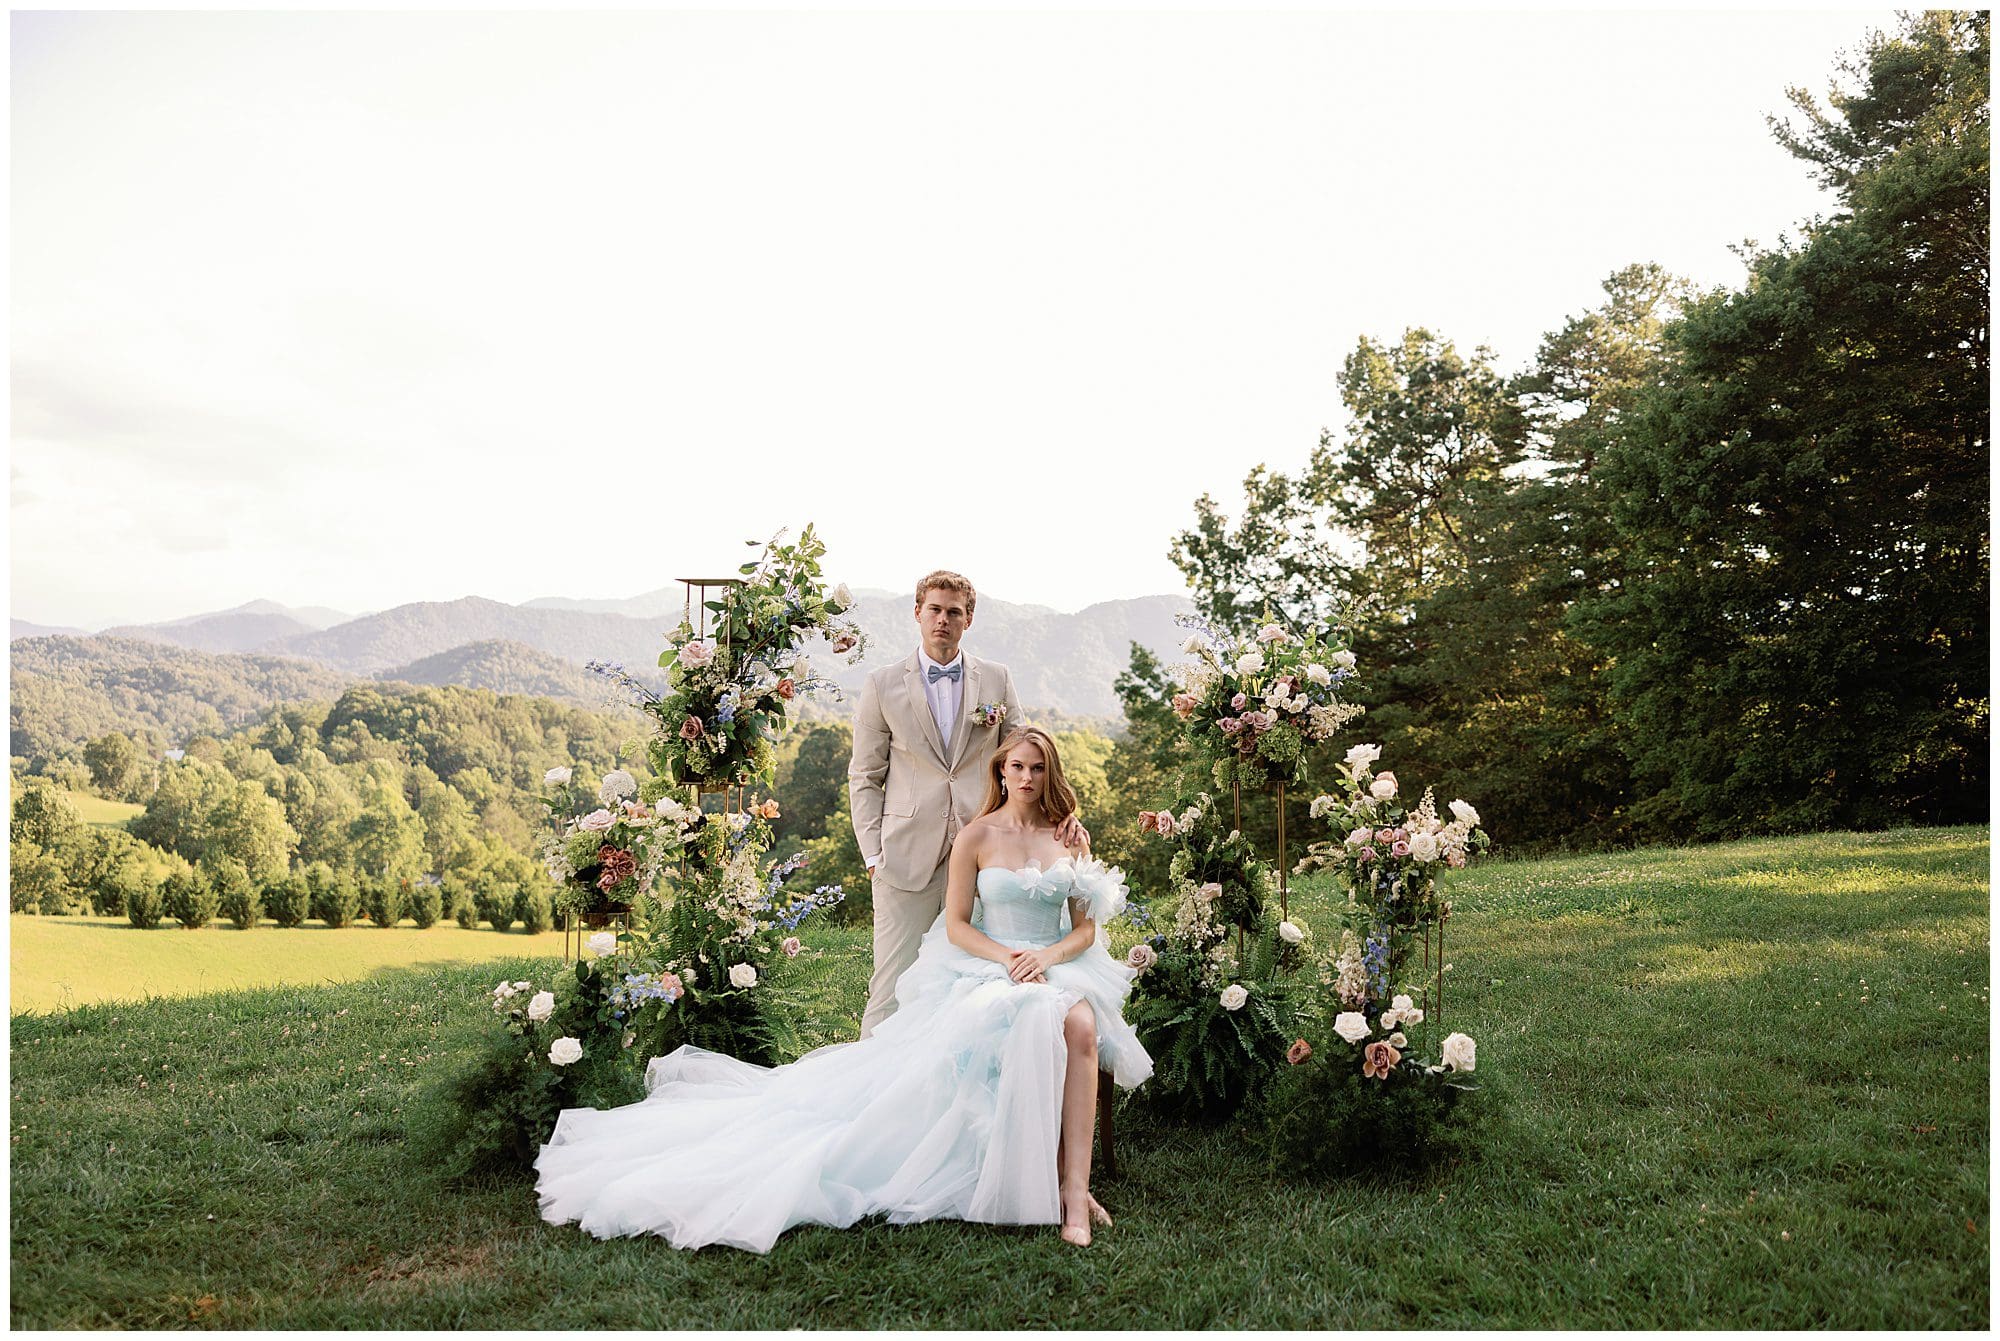 A Parisian-inspired summer wedding at The Ridge with a bride and groom posing for a photo amidst the mountains.